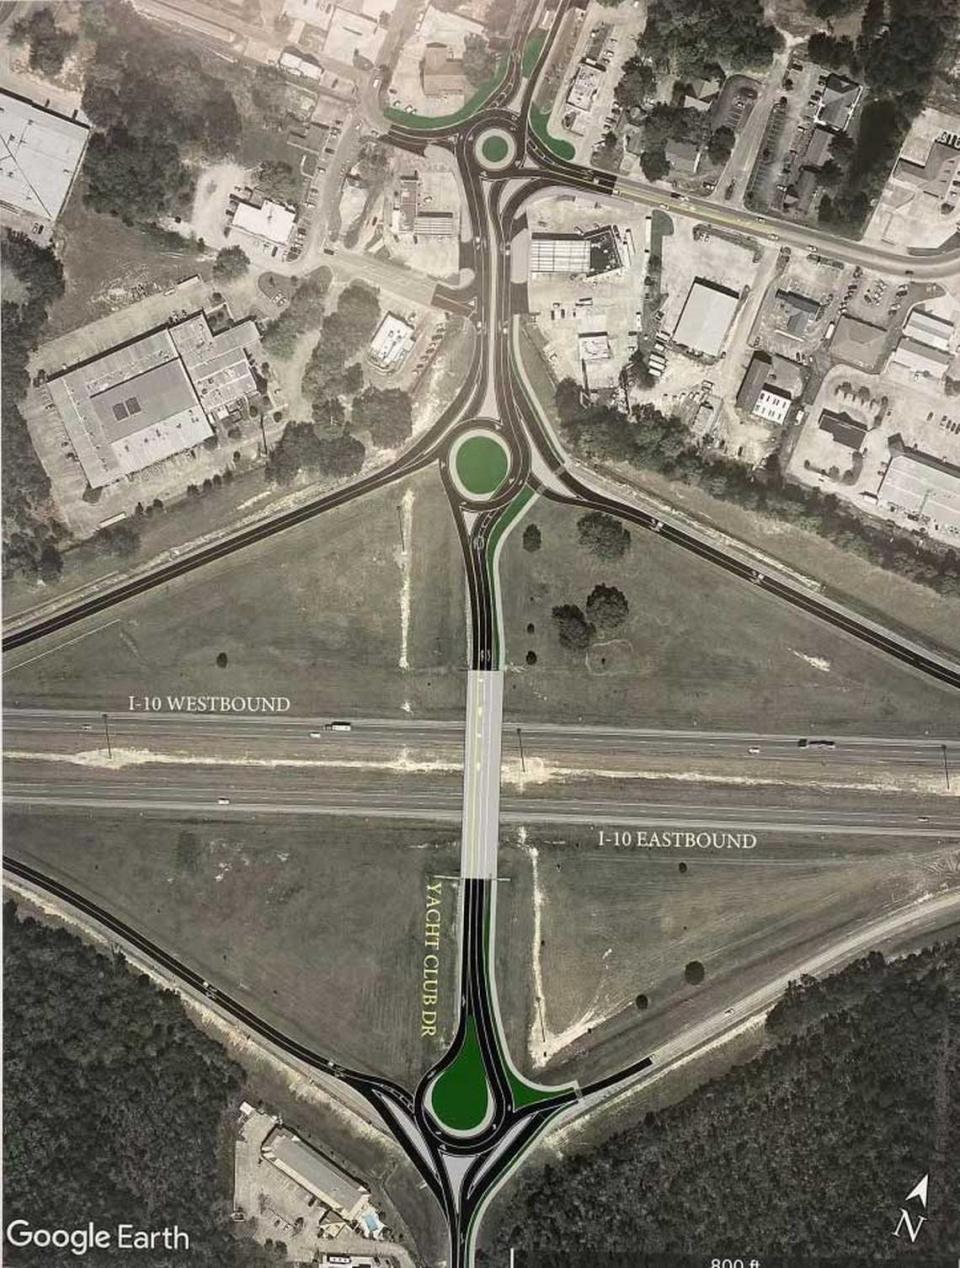 An image provided by the Mississippi Department of Transportation shows three future roundabouts planned for the Diamondhead interchange off I-10. The agency is building three roundabouts and adding another multi-use path on the overpass that will connect bike and golf cart traffic across the north and south sides of Diamondhead by 2026.